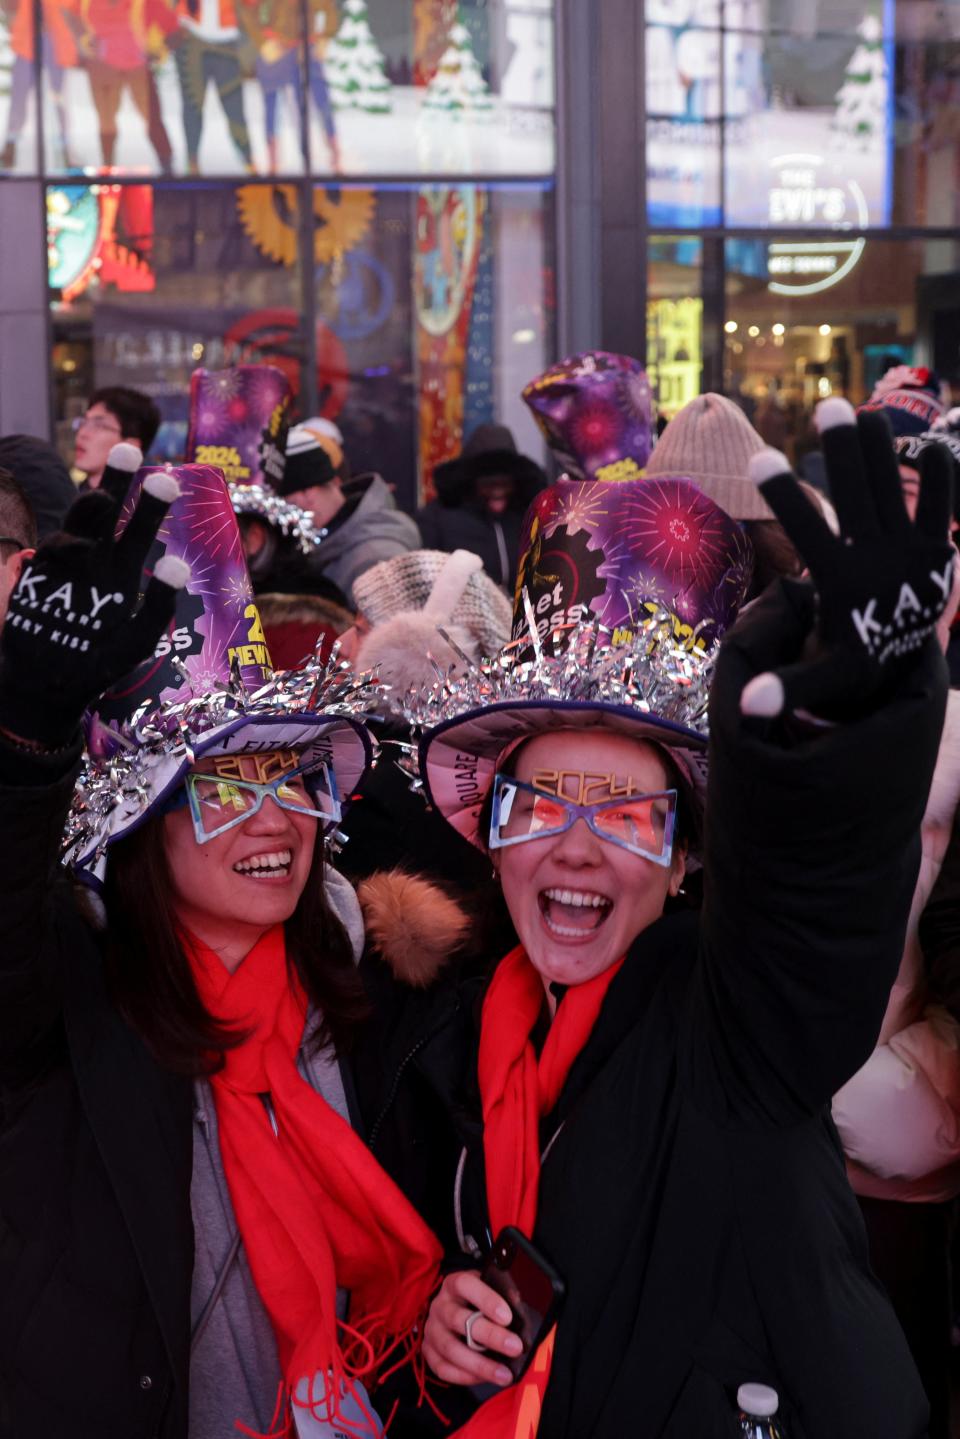 Revellers gather in Times Square during the celebrations of New Year's Eve, in New York City (Reuters)